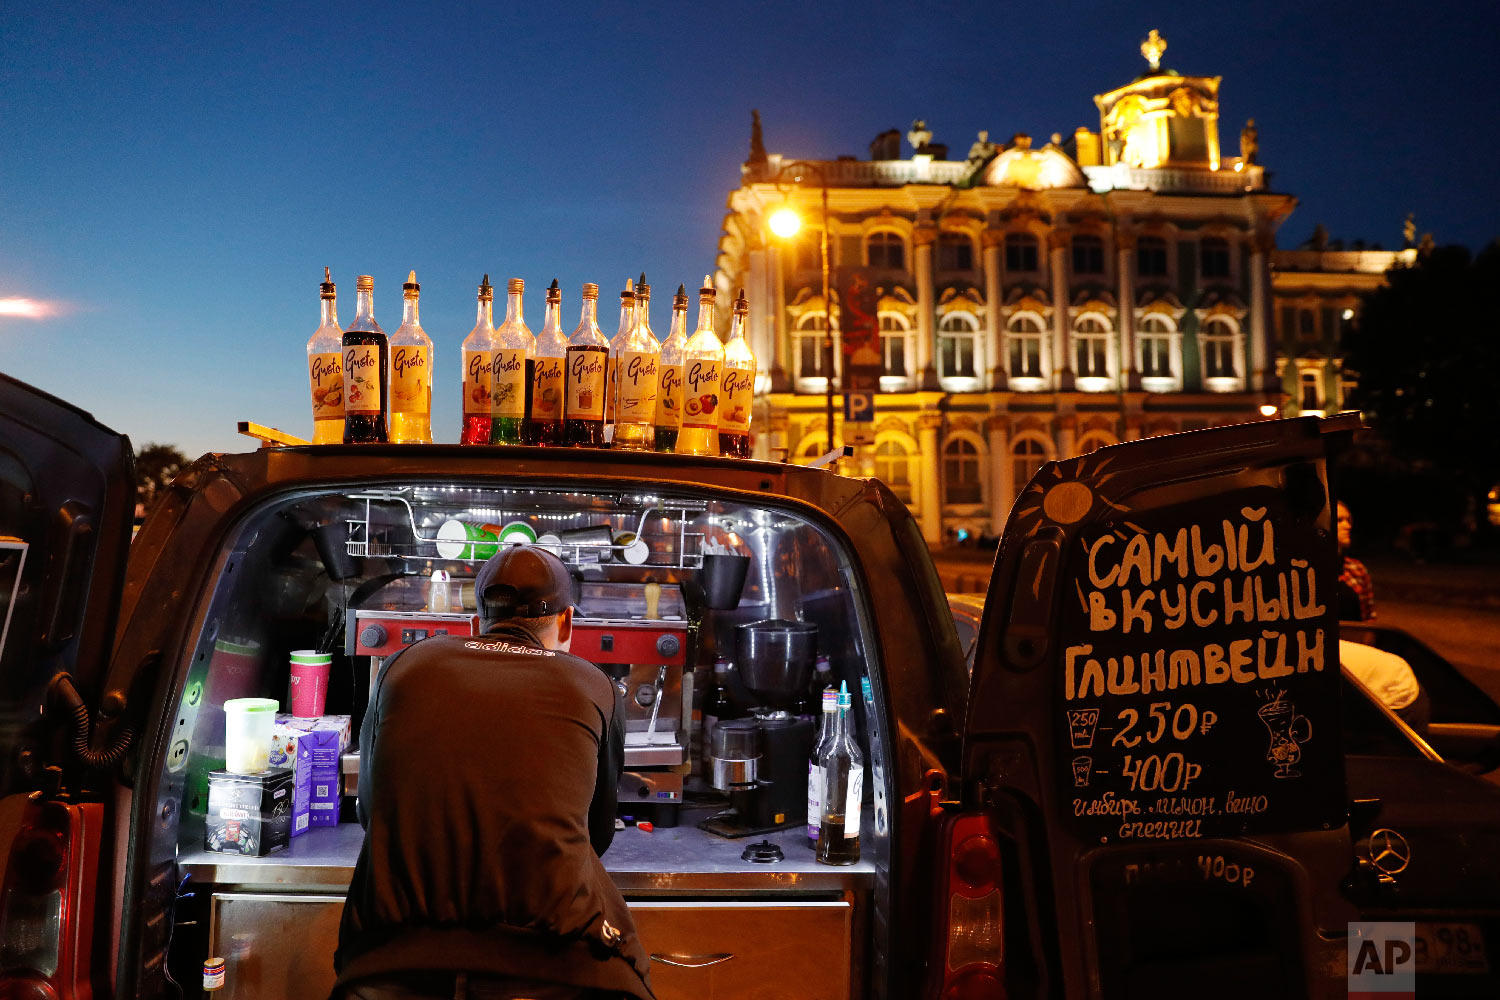  A vendor prepares coffee on the back of a van during the 2018 soccer World Cup in St. Petersburg, Russia on June 26, 2018. (AP Photo/Ricardo Mazalan) 